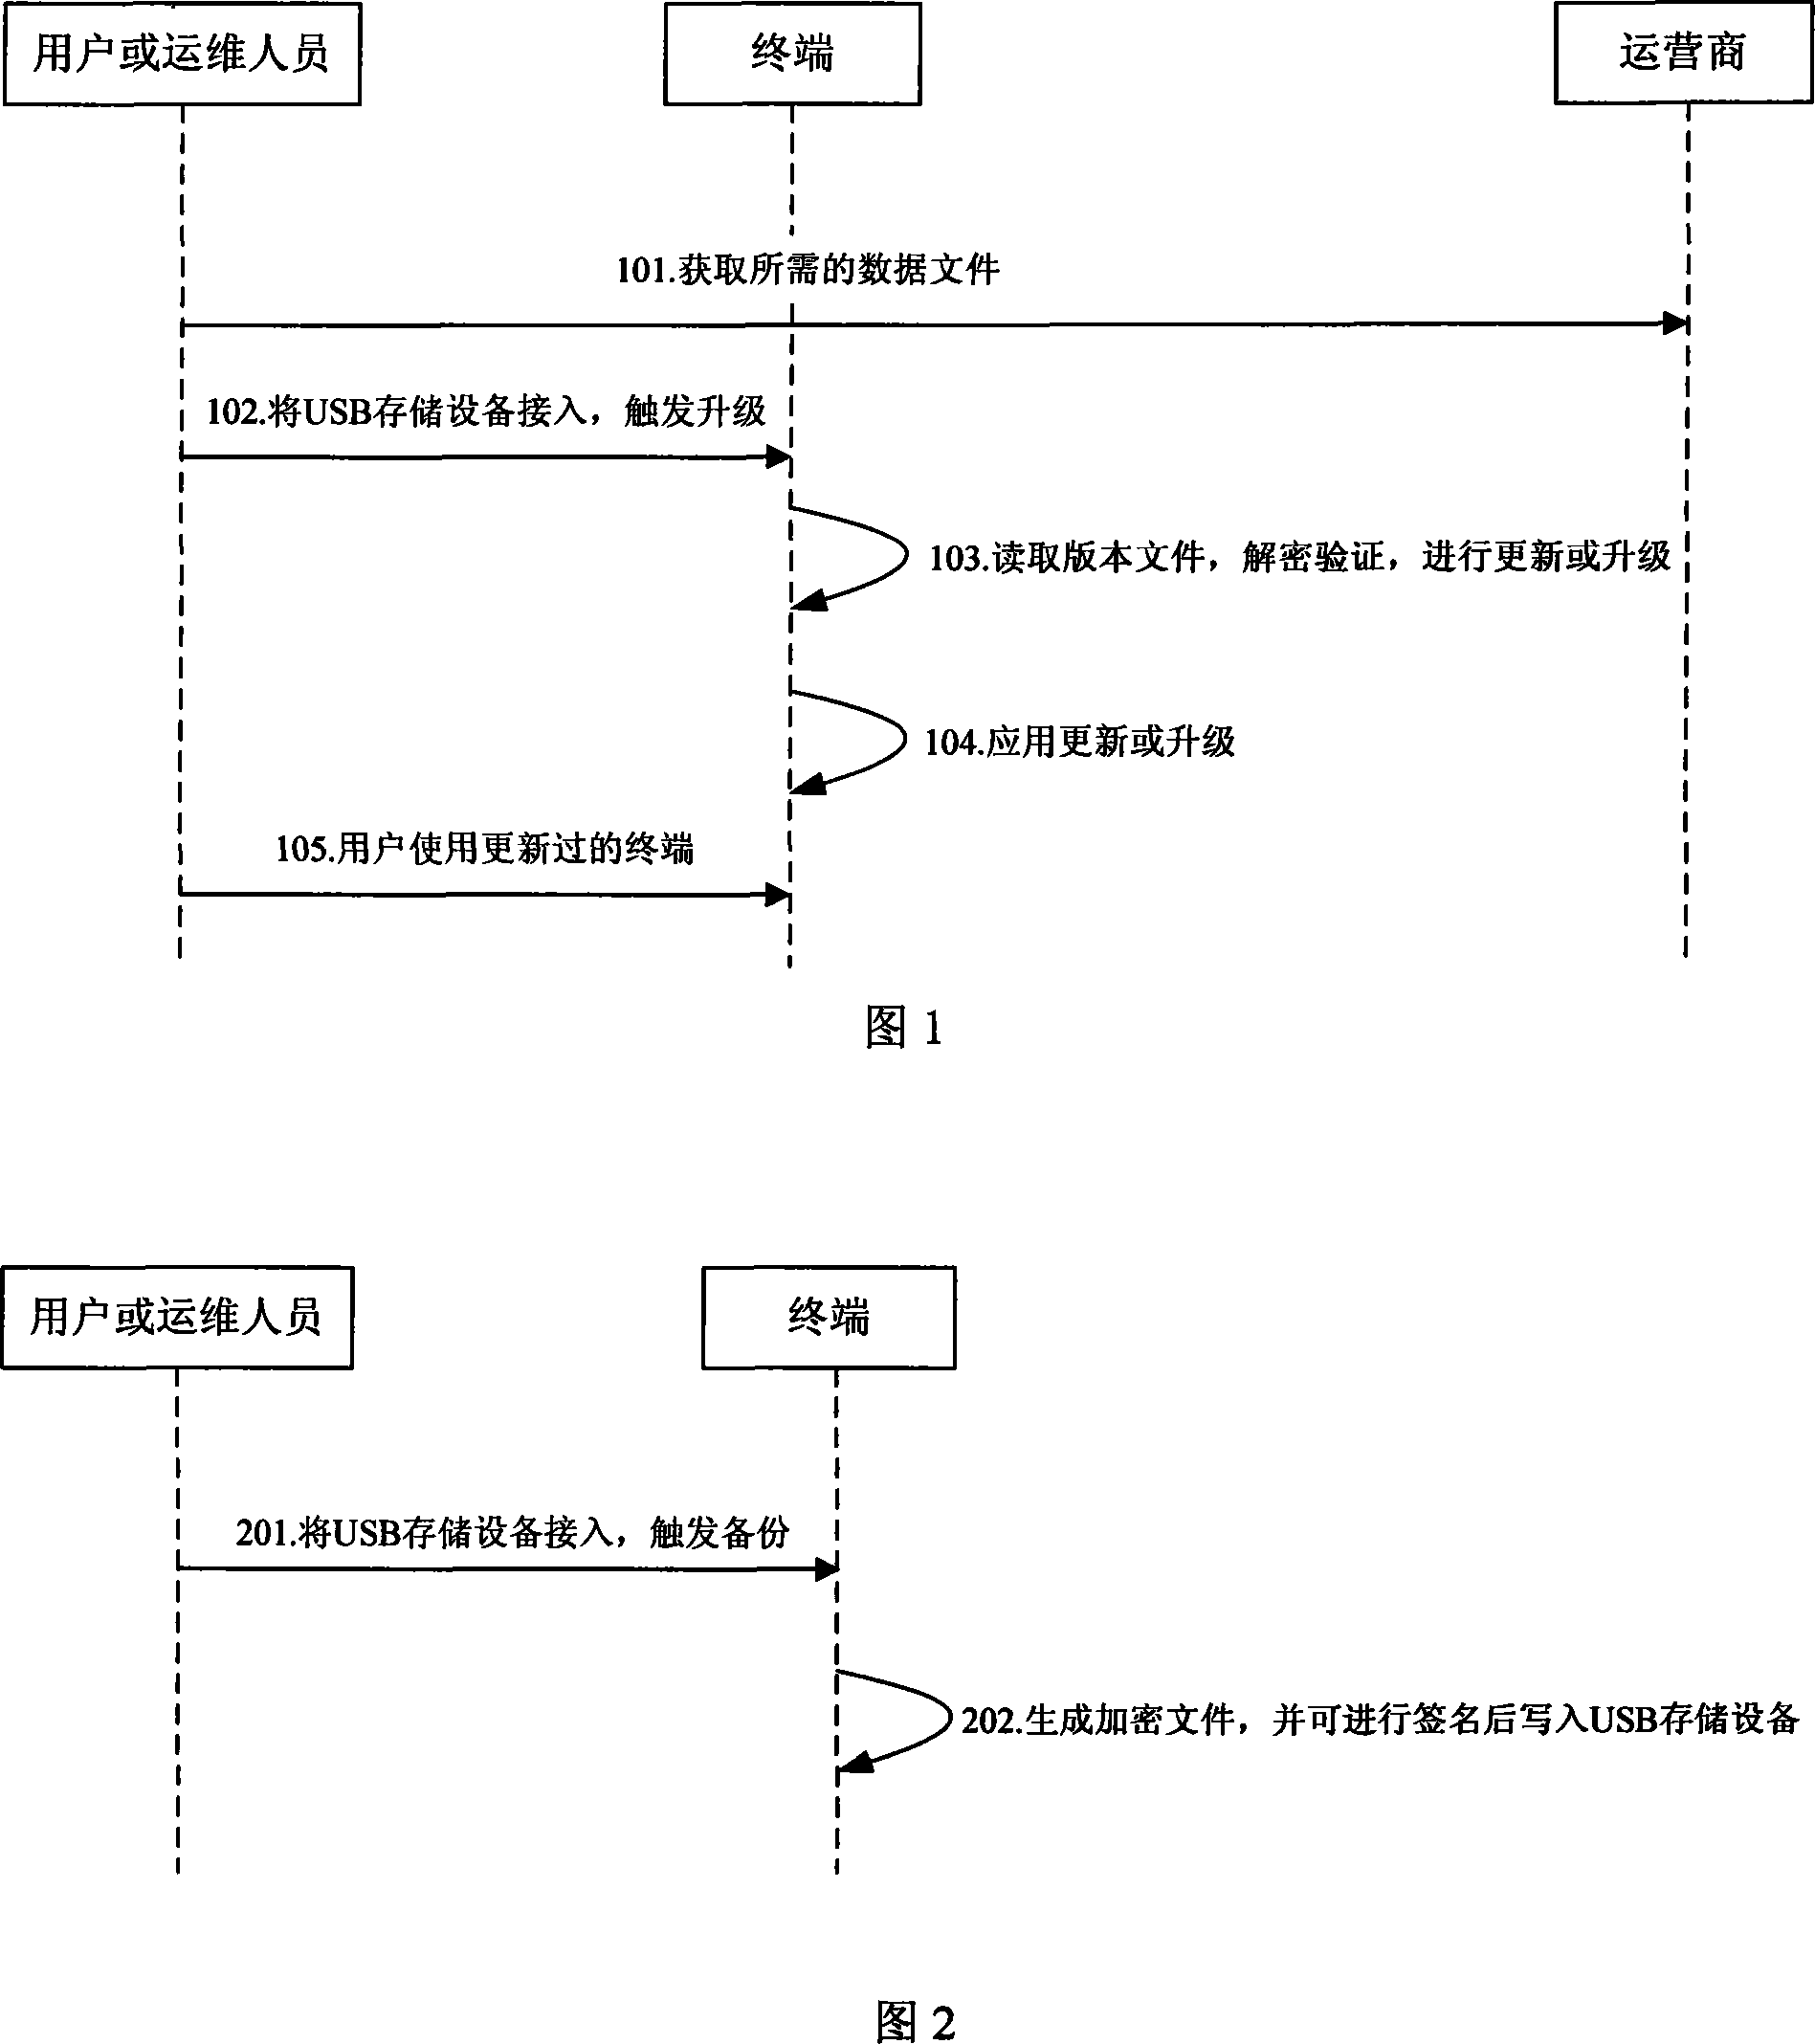 Method for realizing version upgrade and backup of terminal by switch-in USB memory apparatus